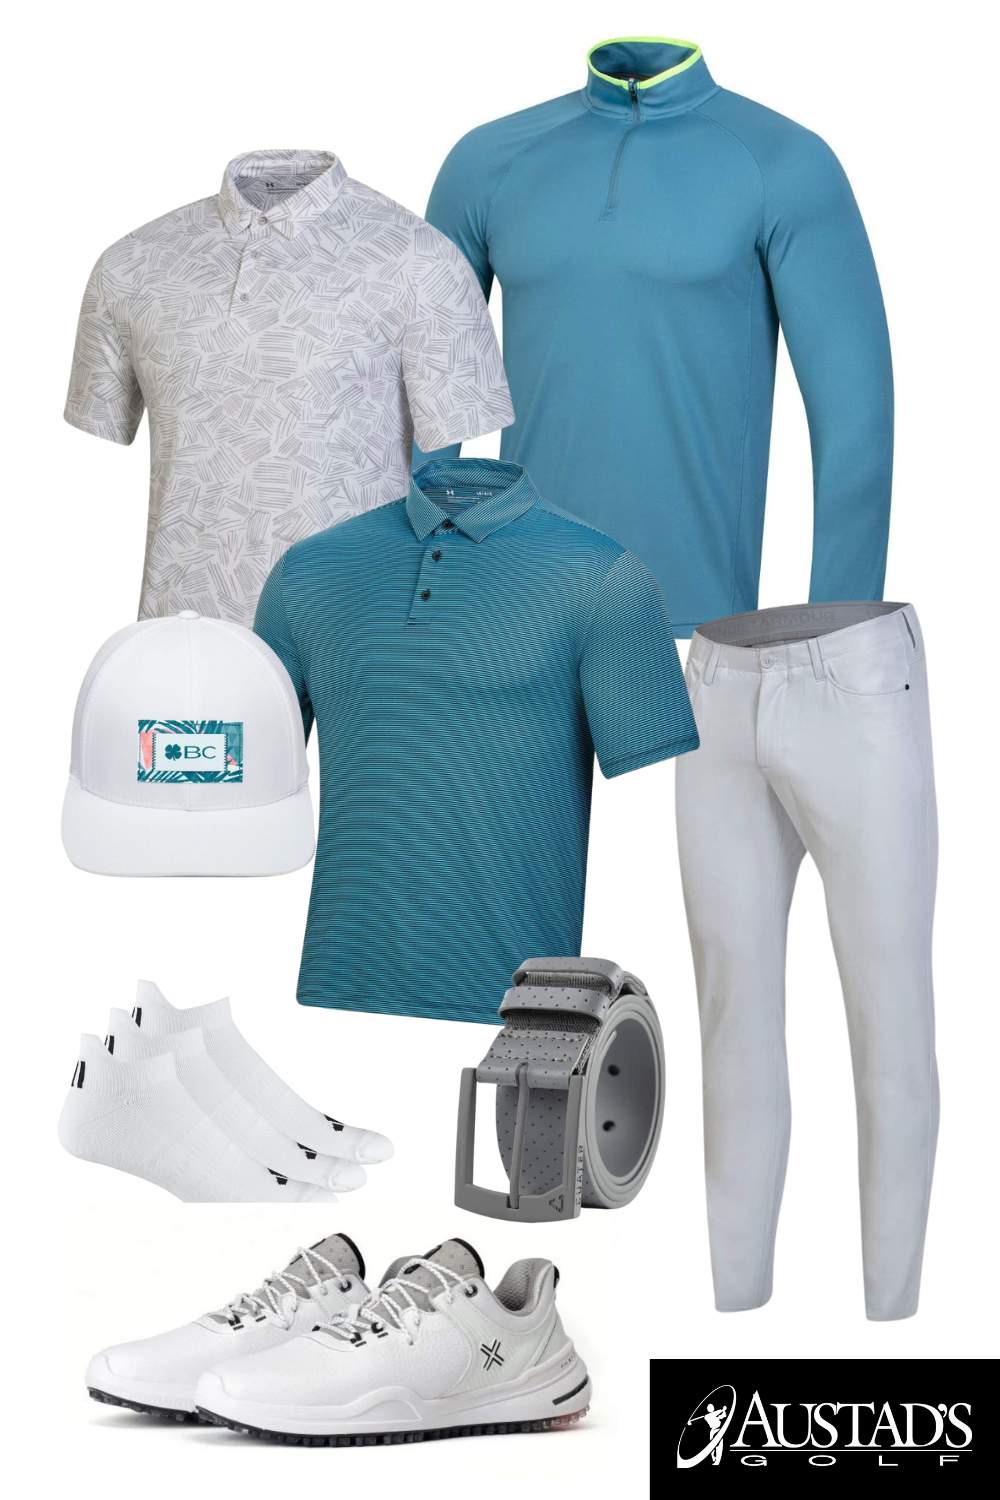 Under Armour Men's Truly Teal Golf Outfit 2023